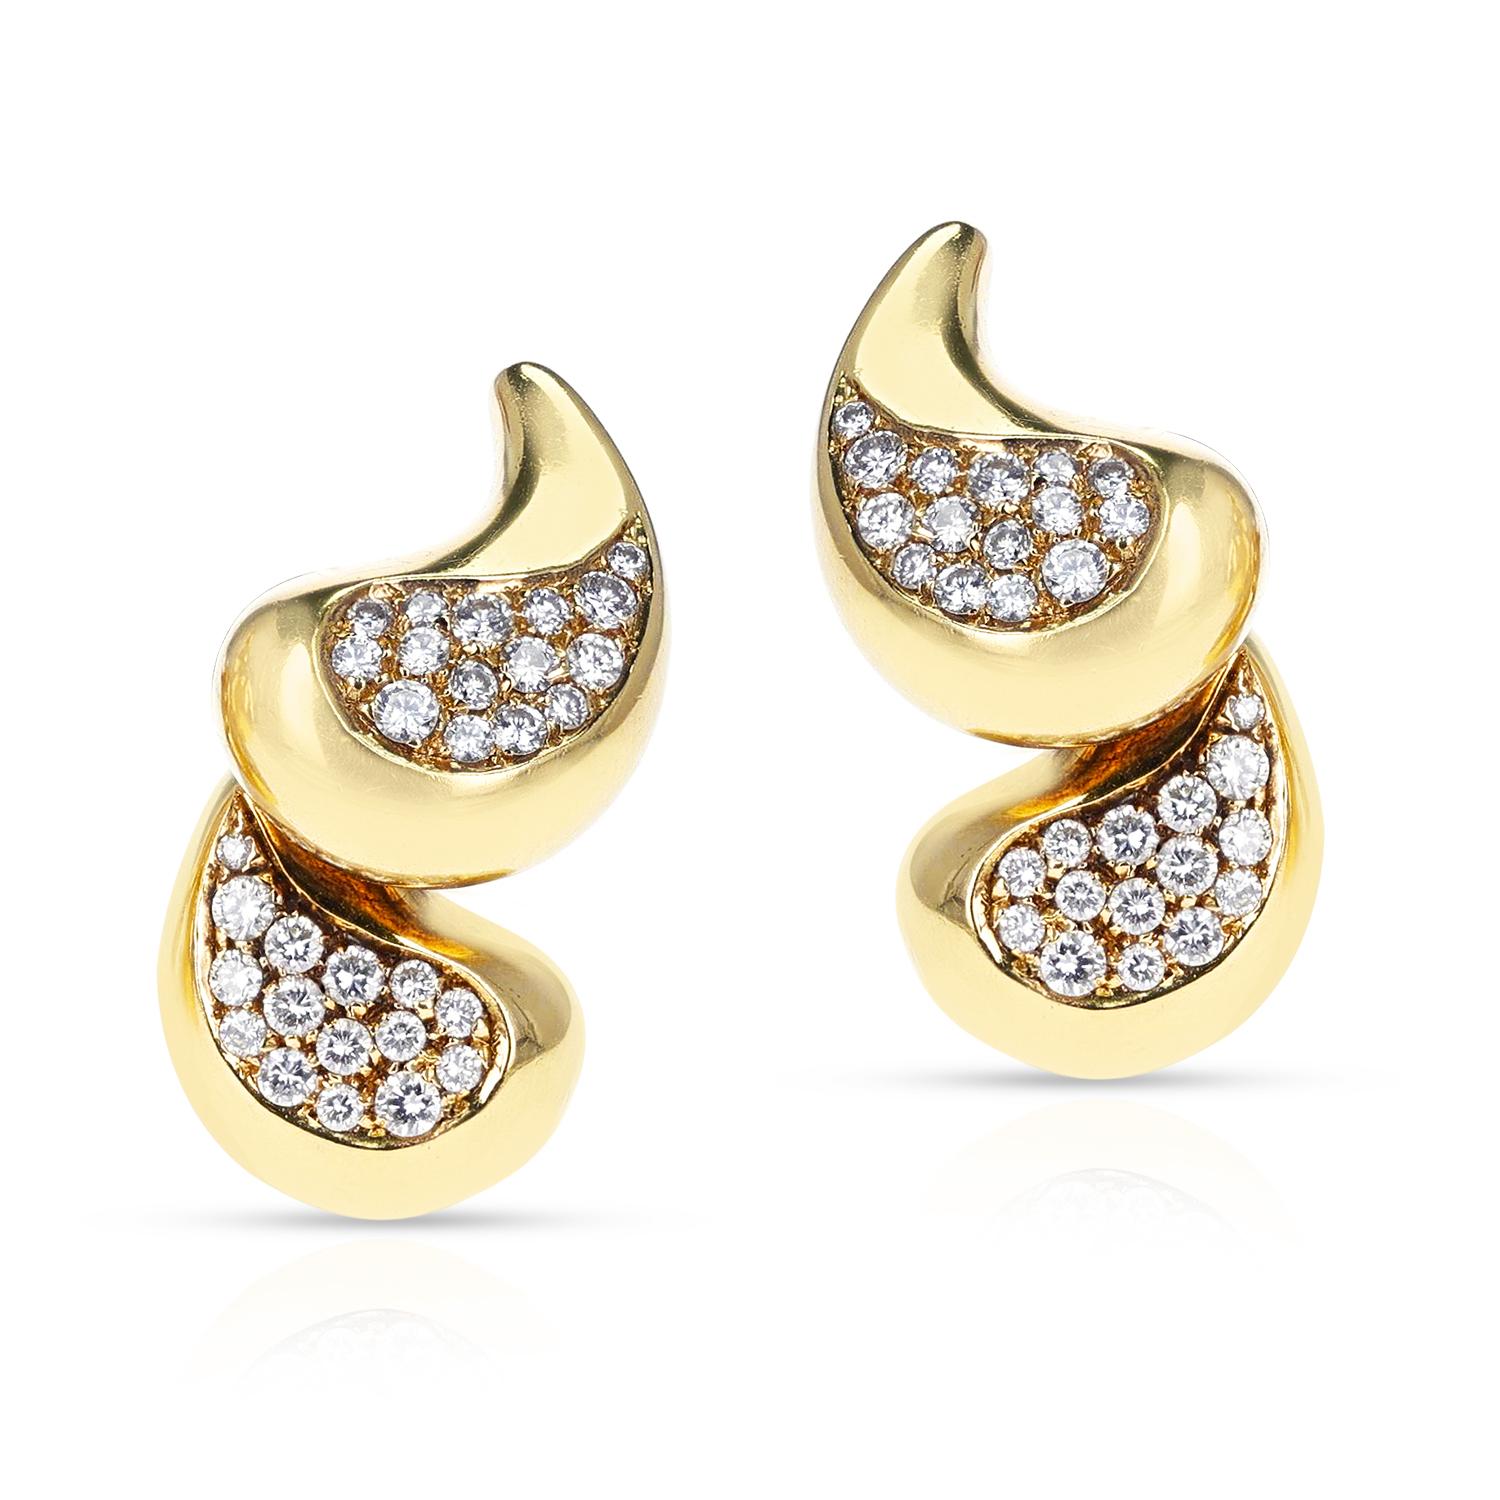 A pair of stylish Marina B Diamond and Gold Earrings made in 18 Karat Yellow Gold.
The total weight of the earrings is 25.28 grams. The length of the earring is 1.20 inches.
